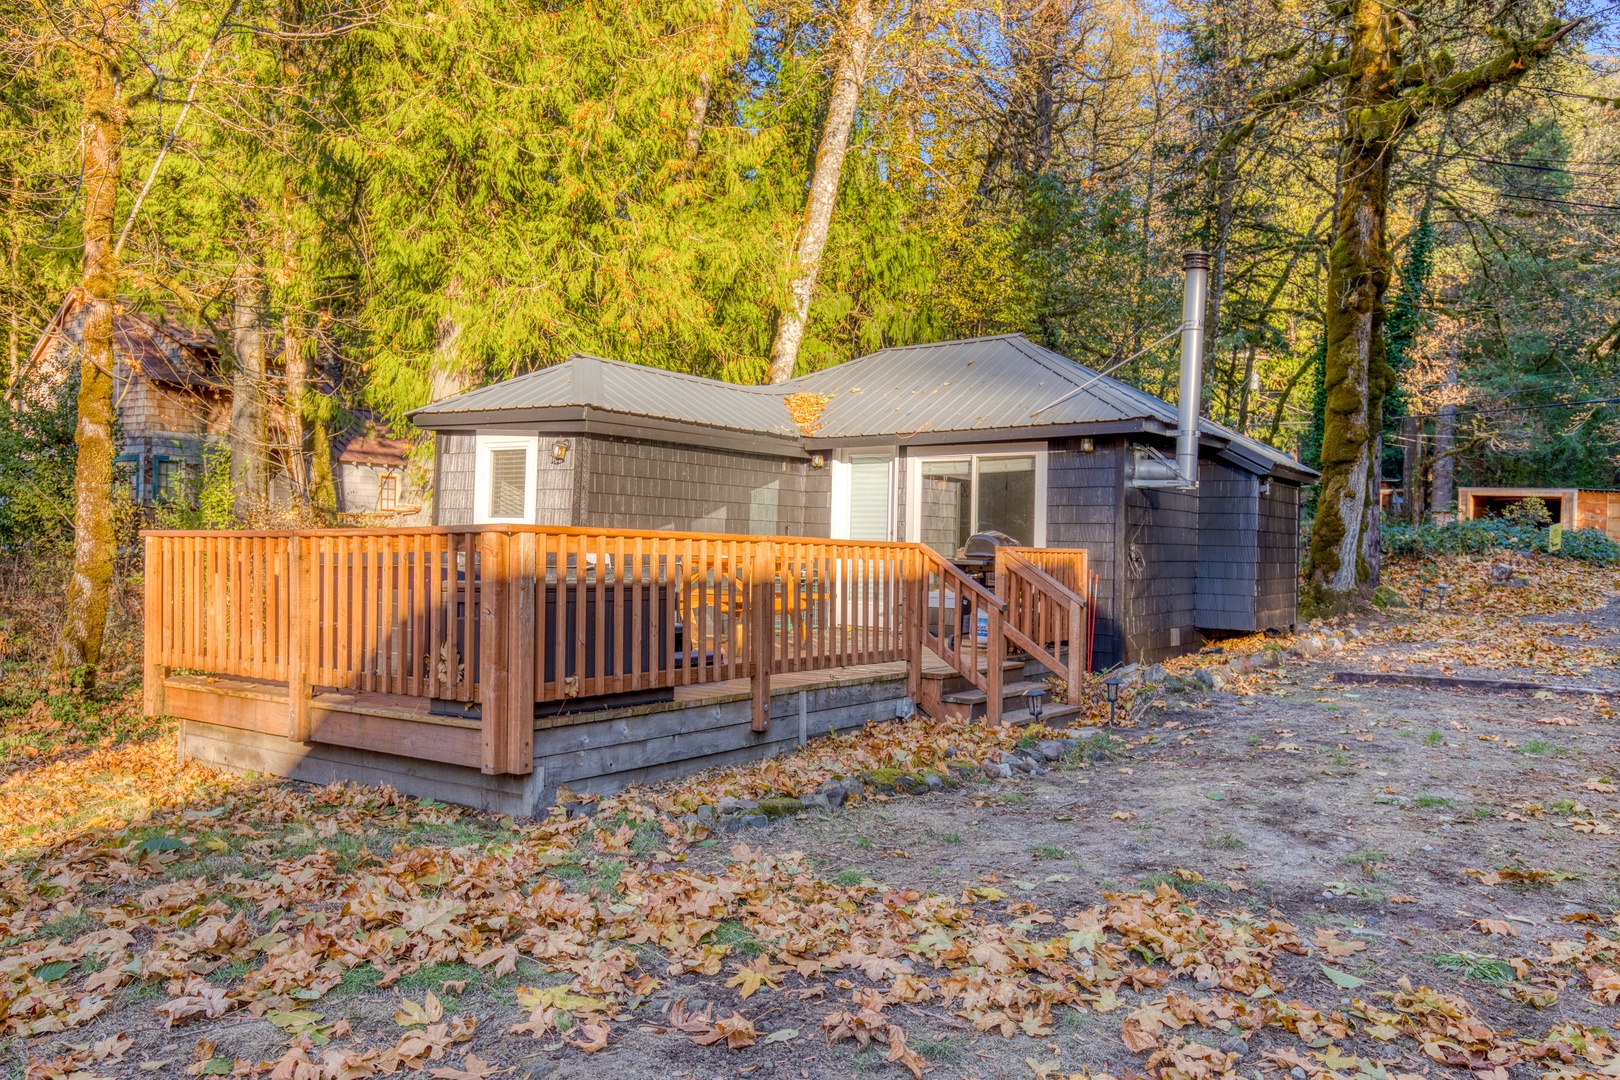 Rhododendron Vacation Rentals, Riverbend Cabin #1 - Back of the house